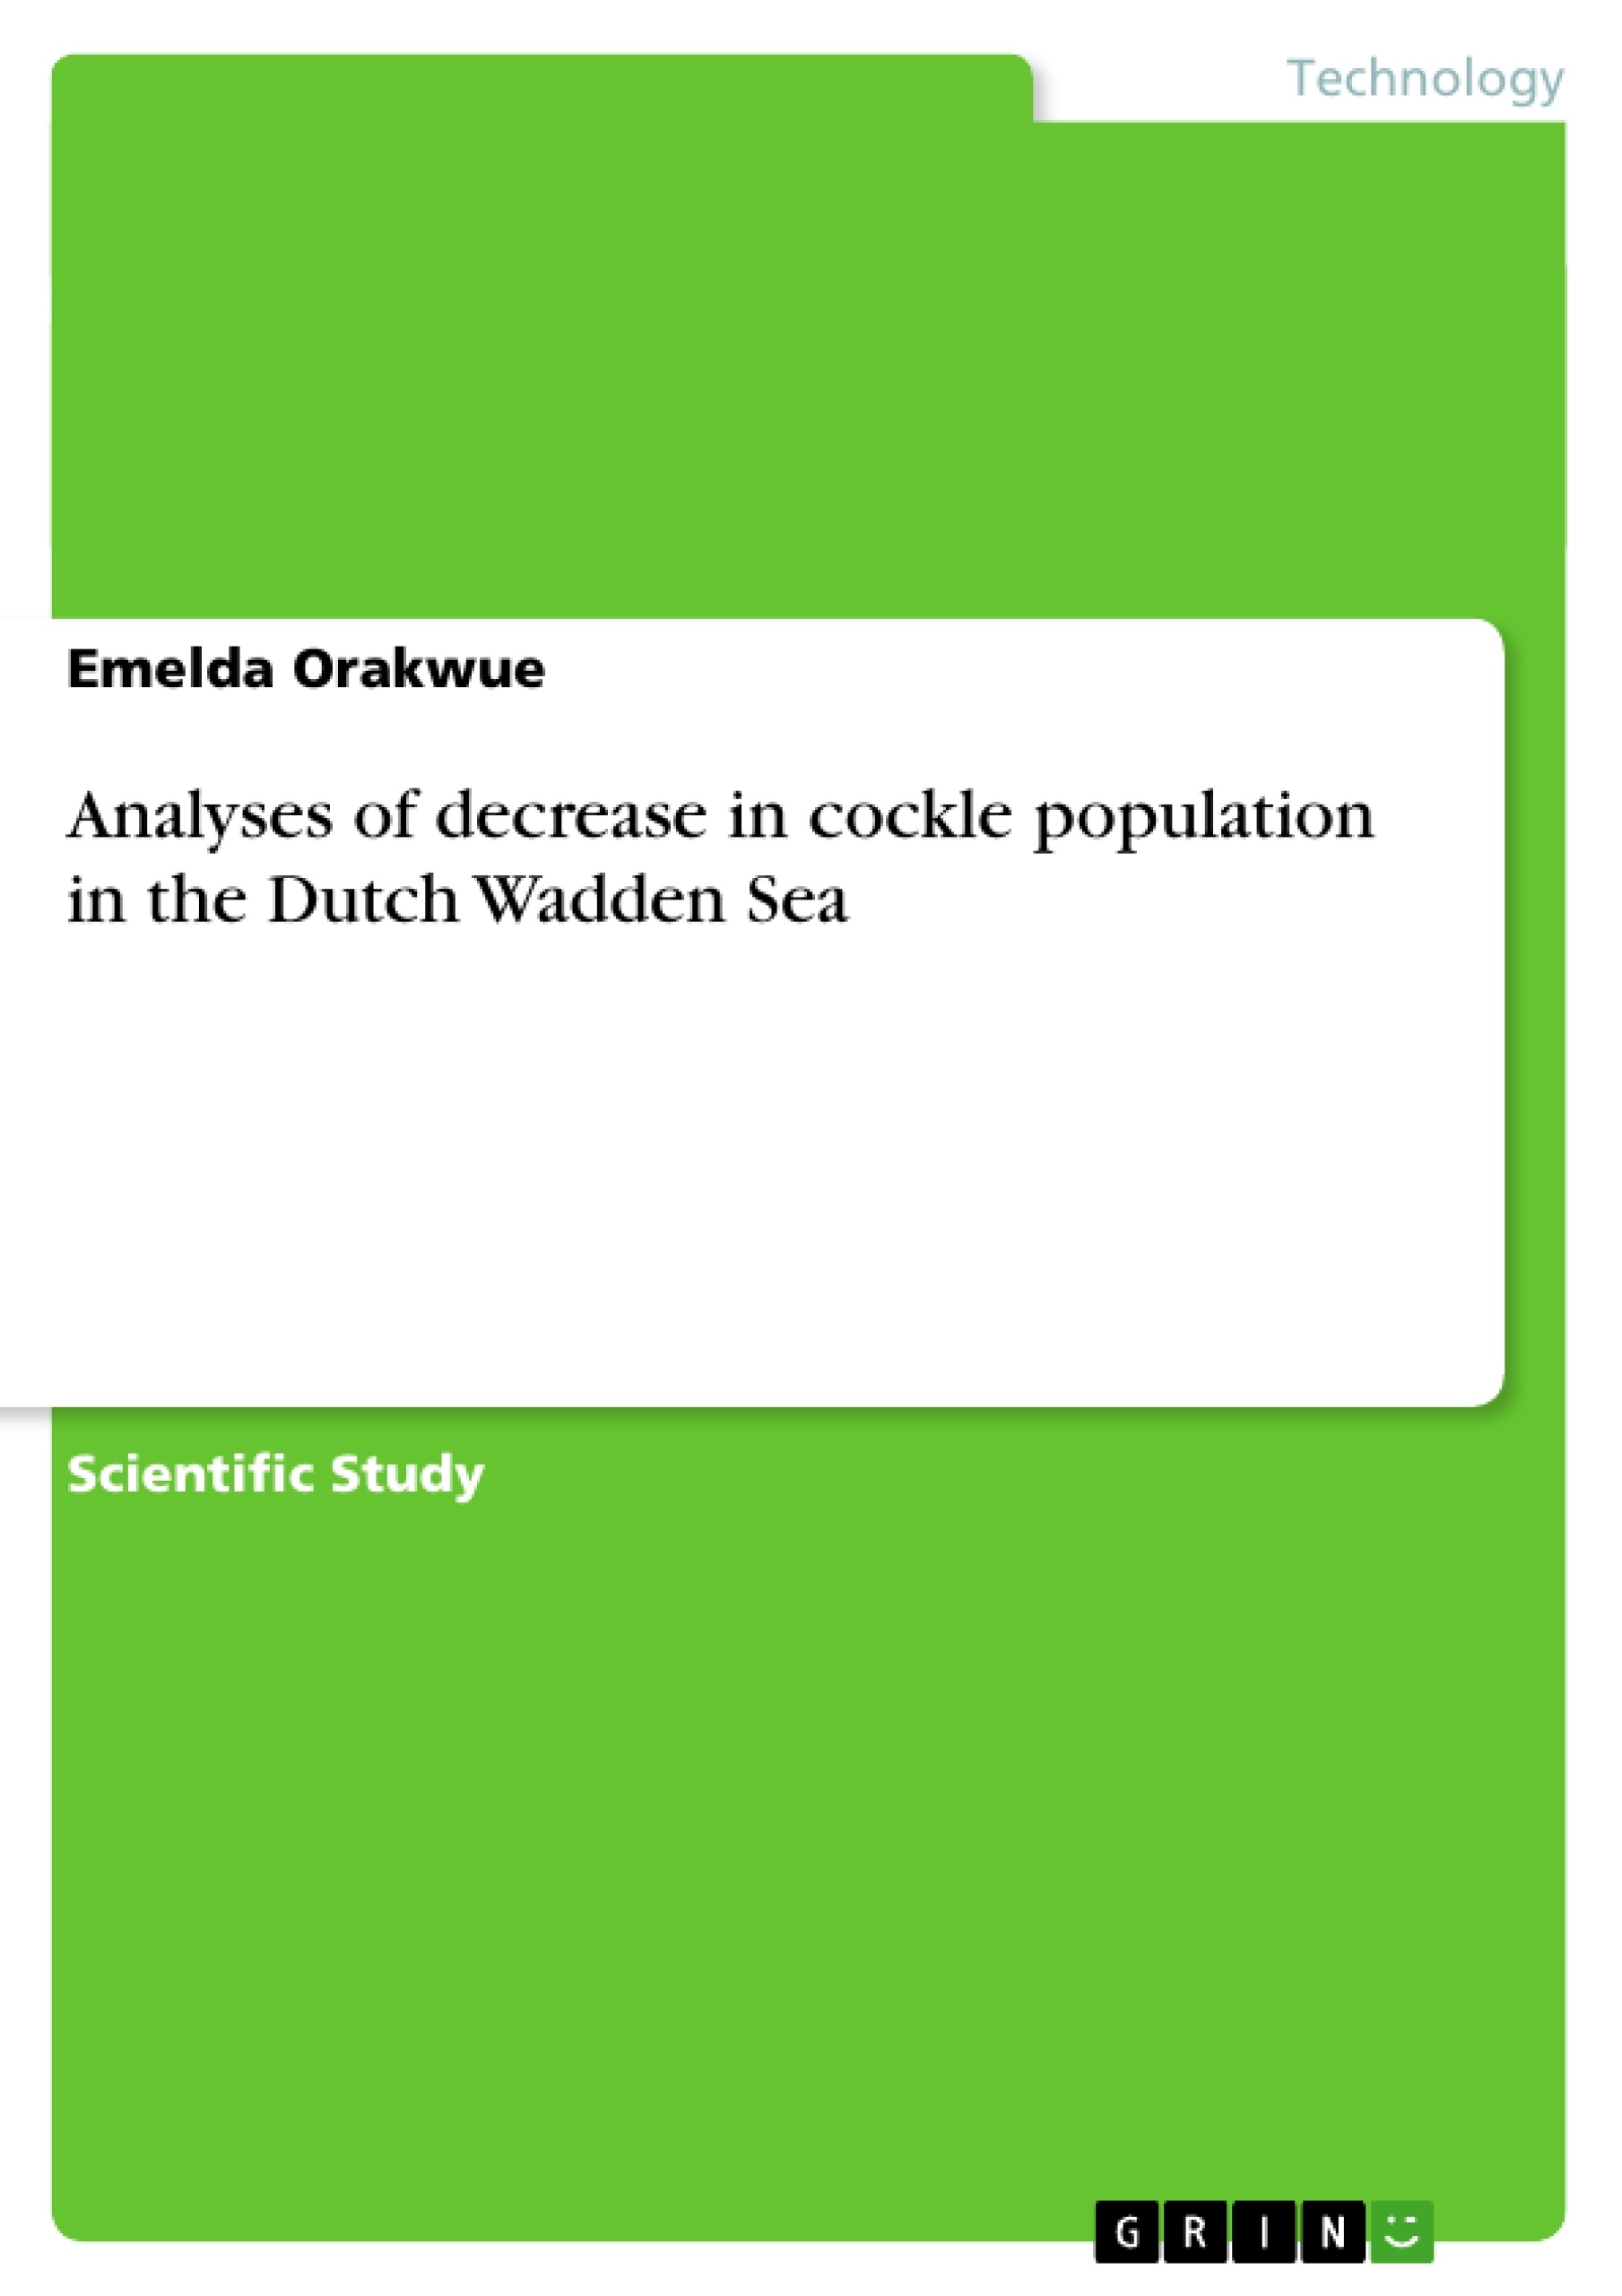 Title: Analyses of decrease in cockle population in the Dutch Wadden Sea 